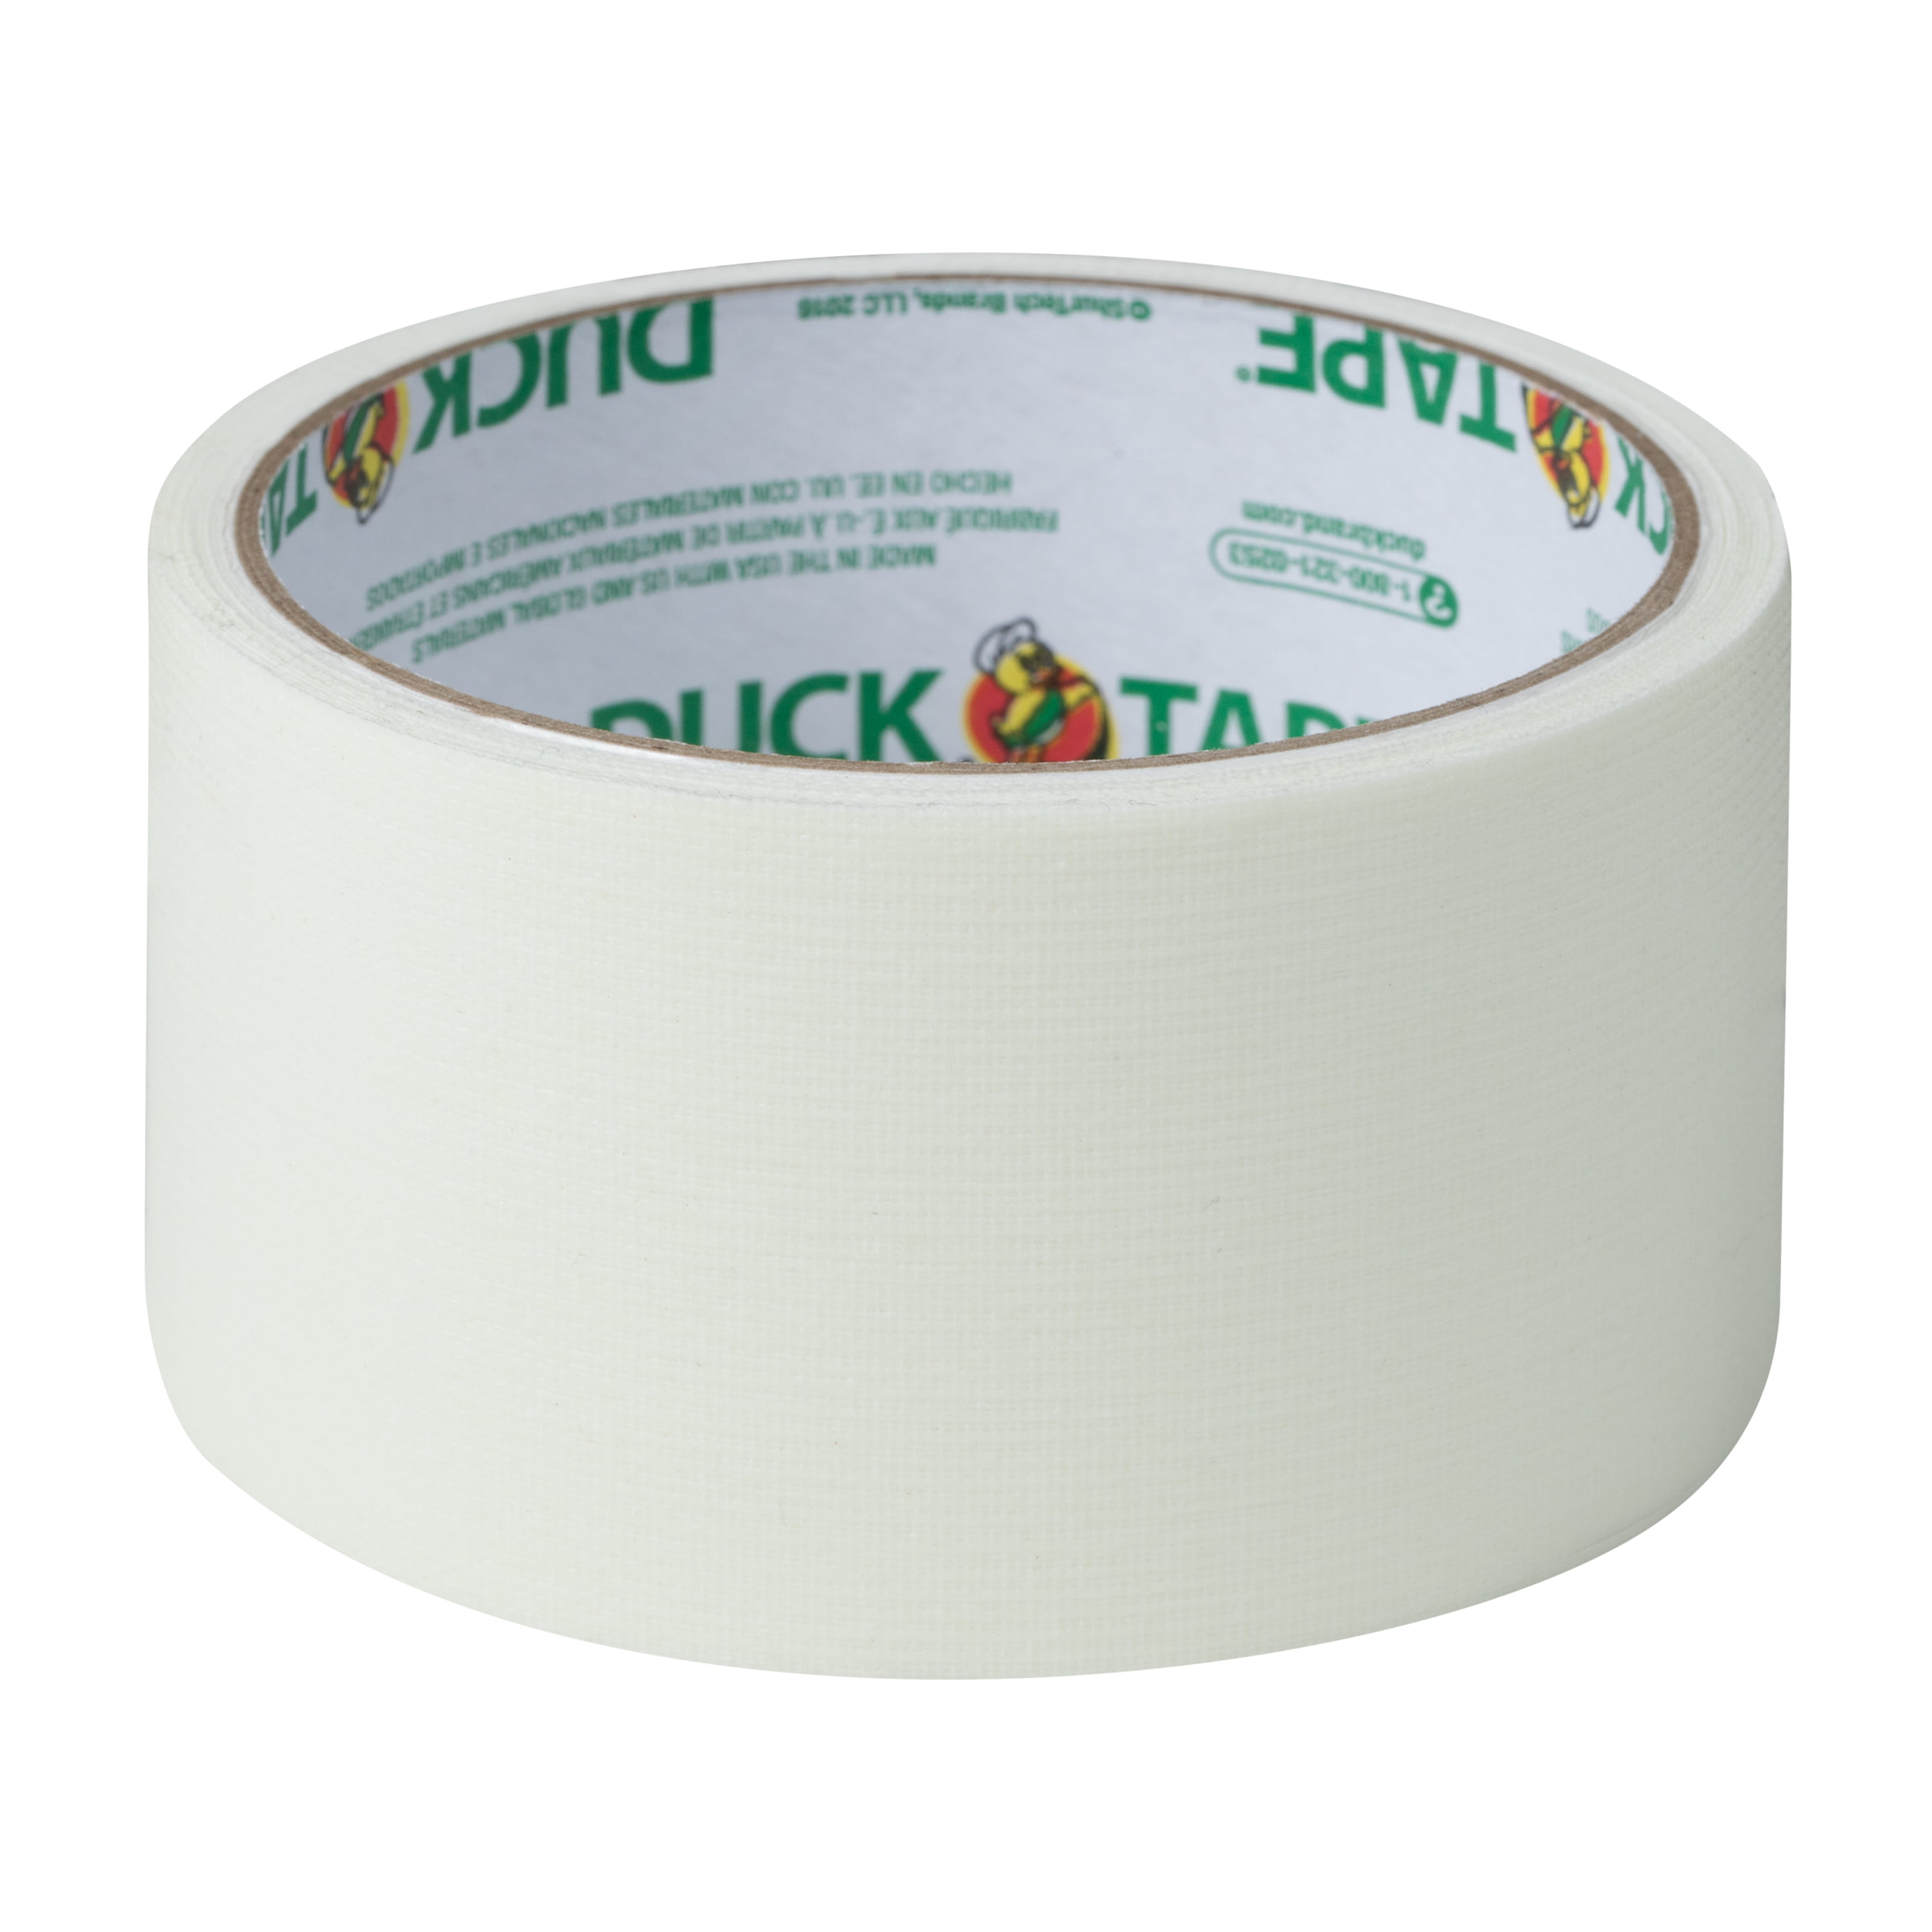 Duck® Brand Glow-in-the-Dark Duct Tape - 1.88 Inch x 10 Foot